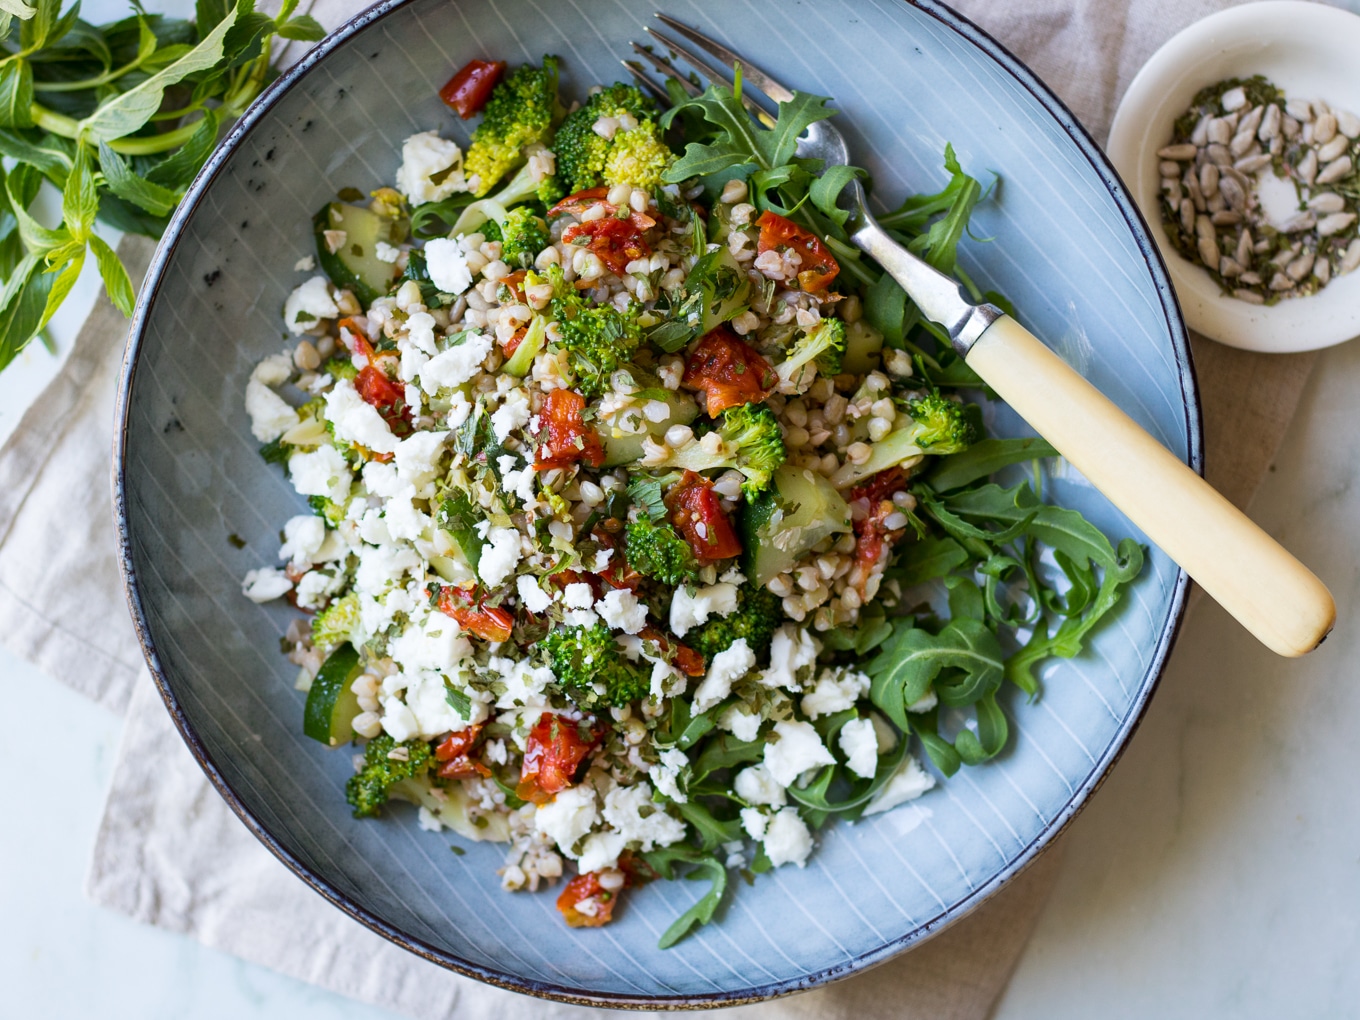 Broccoli Buckwheat Salad with chopped semi dried tomatoes topped with feta cheese in bowl - recipe by Nourish Every Day